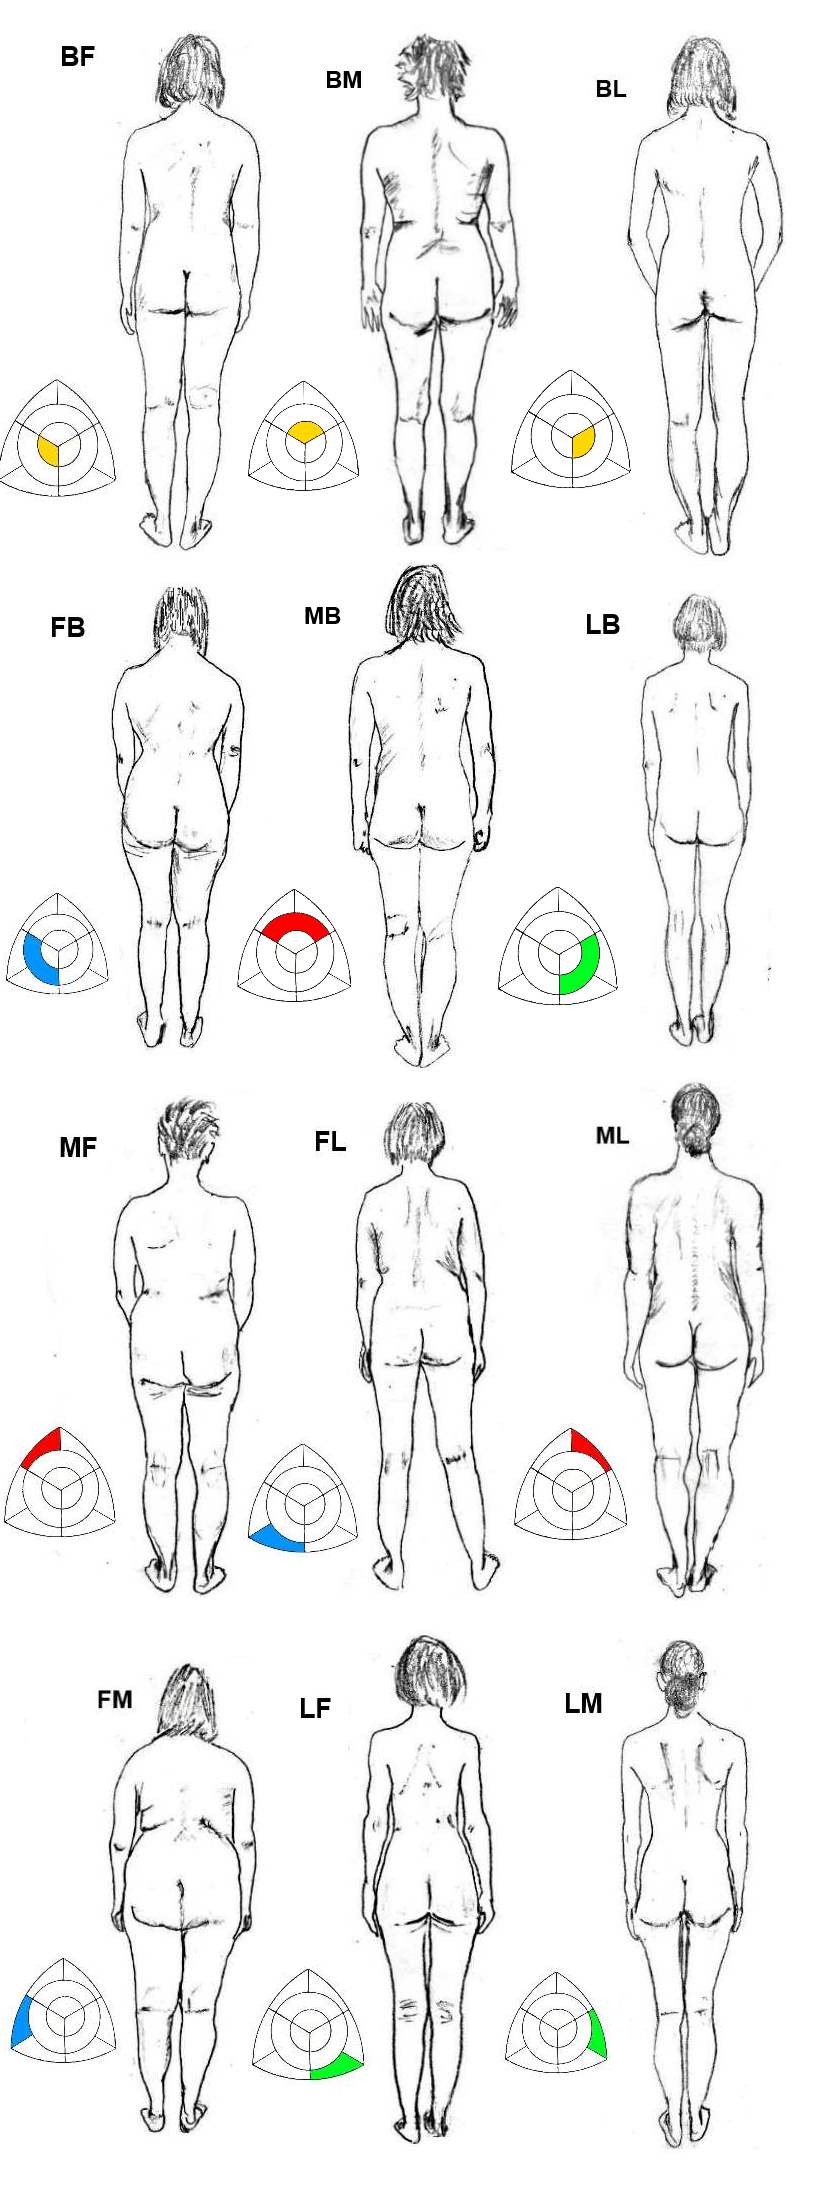 Different Body Types Chart